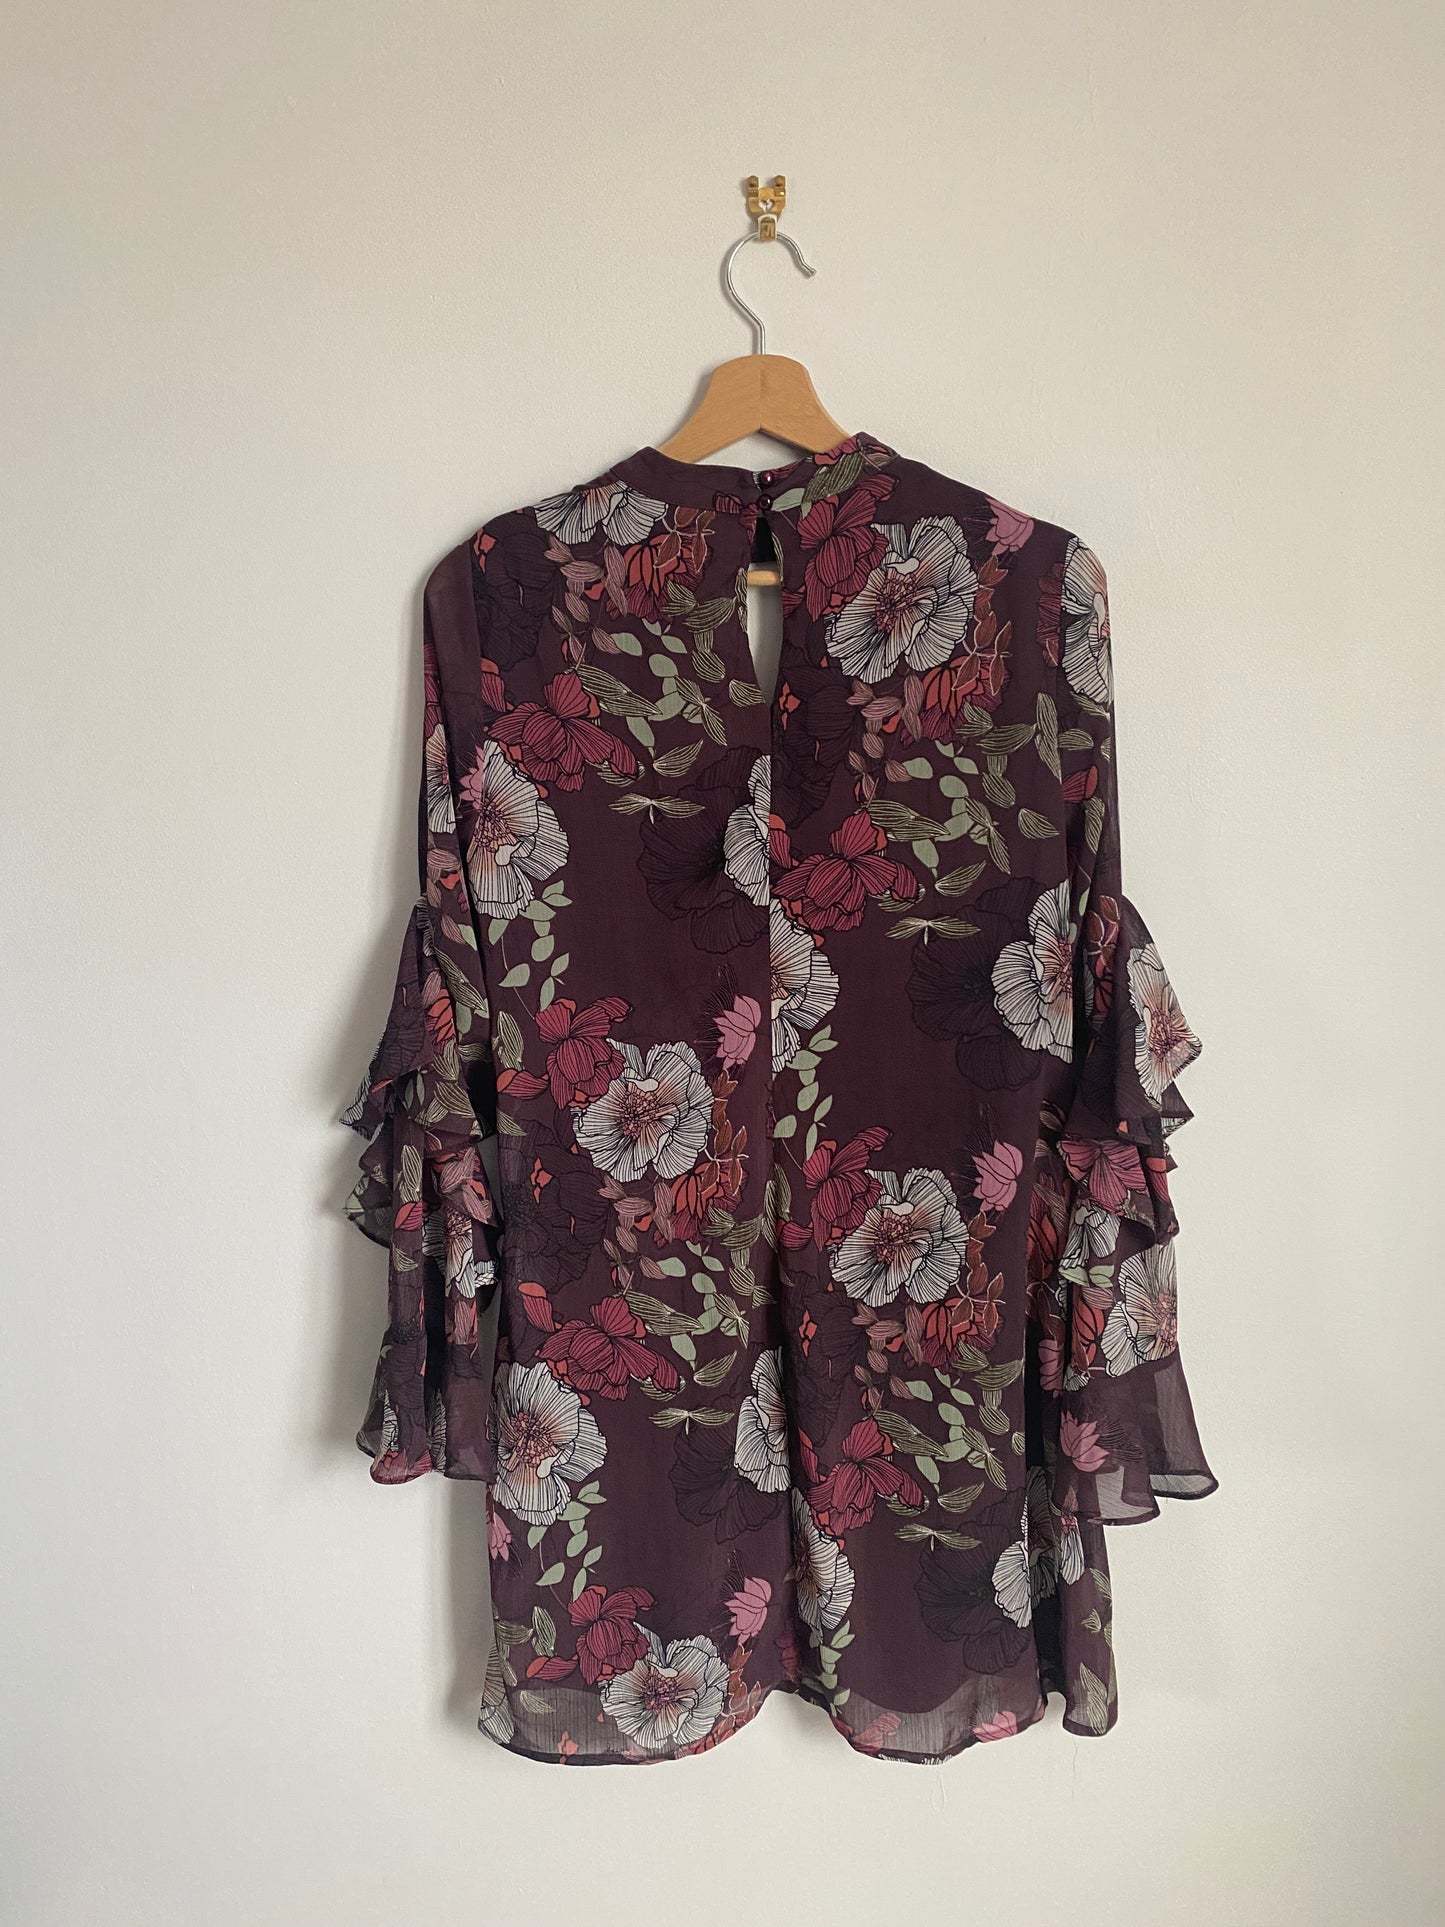 Robe Charlotte Russe fleurie Taille S